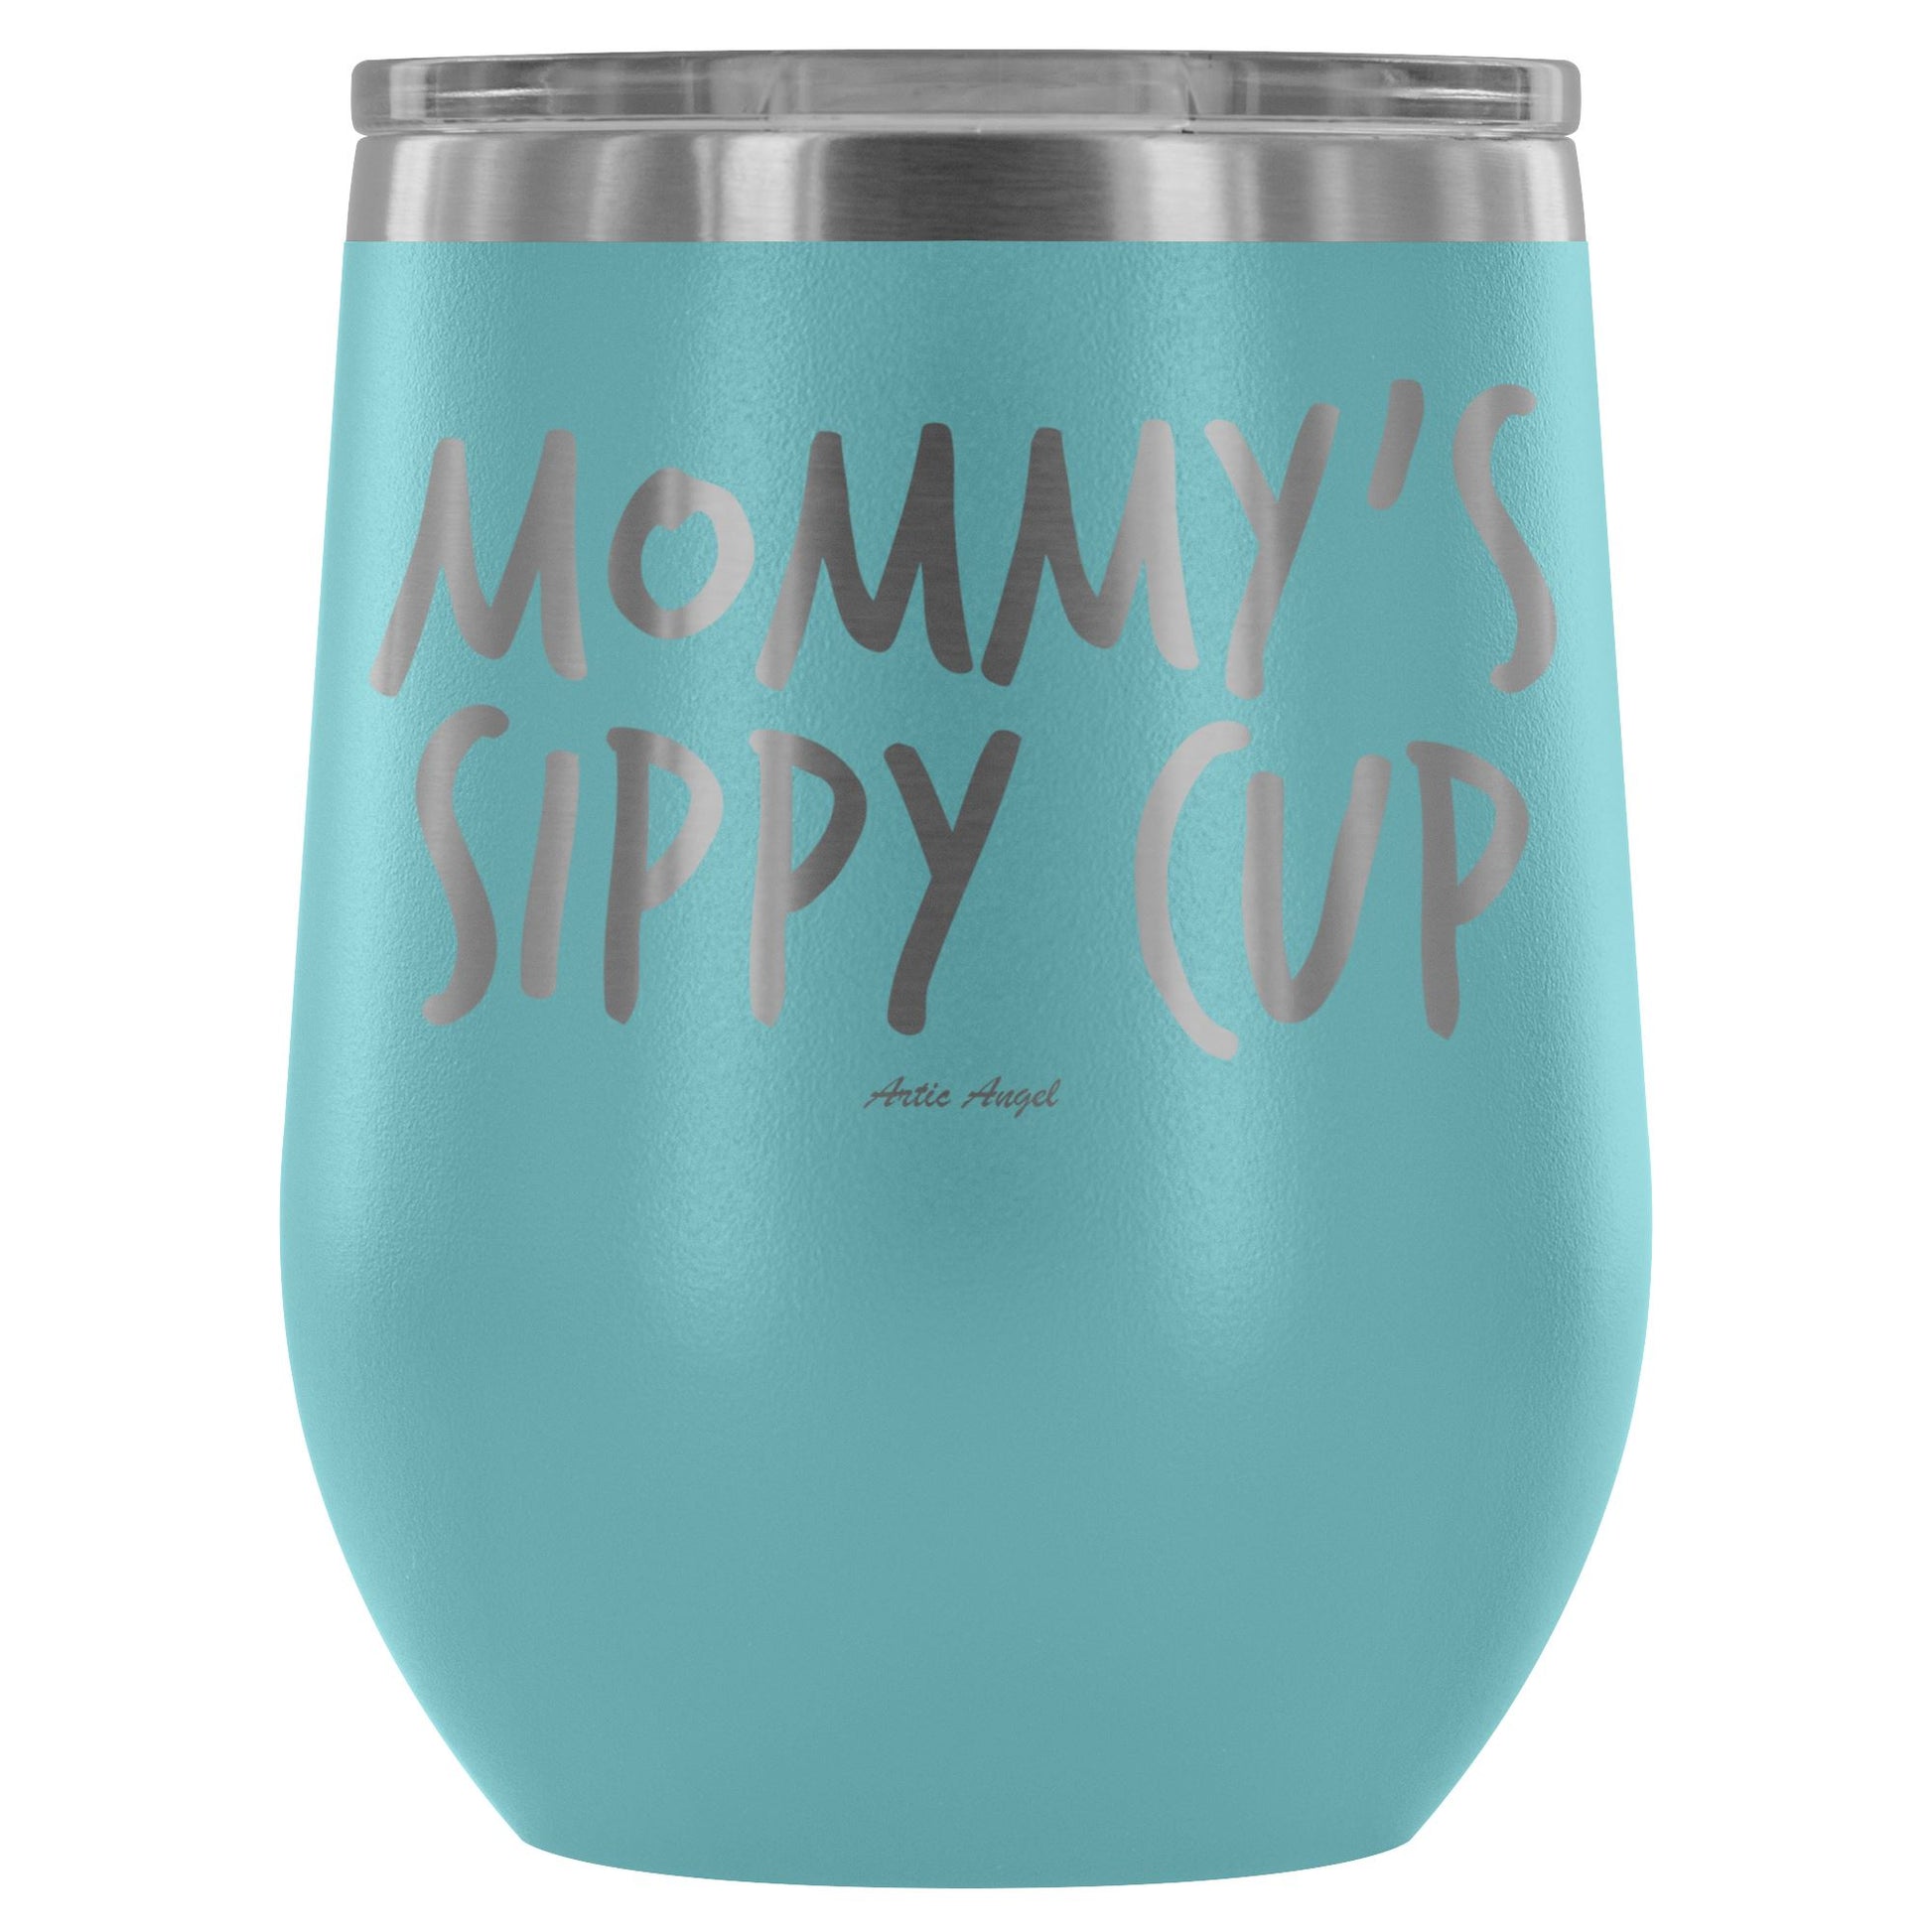 "Mommy's Sippy Cup" - Stemless Wine Cup Wine Tumbler Light Blue 